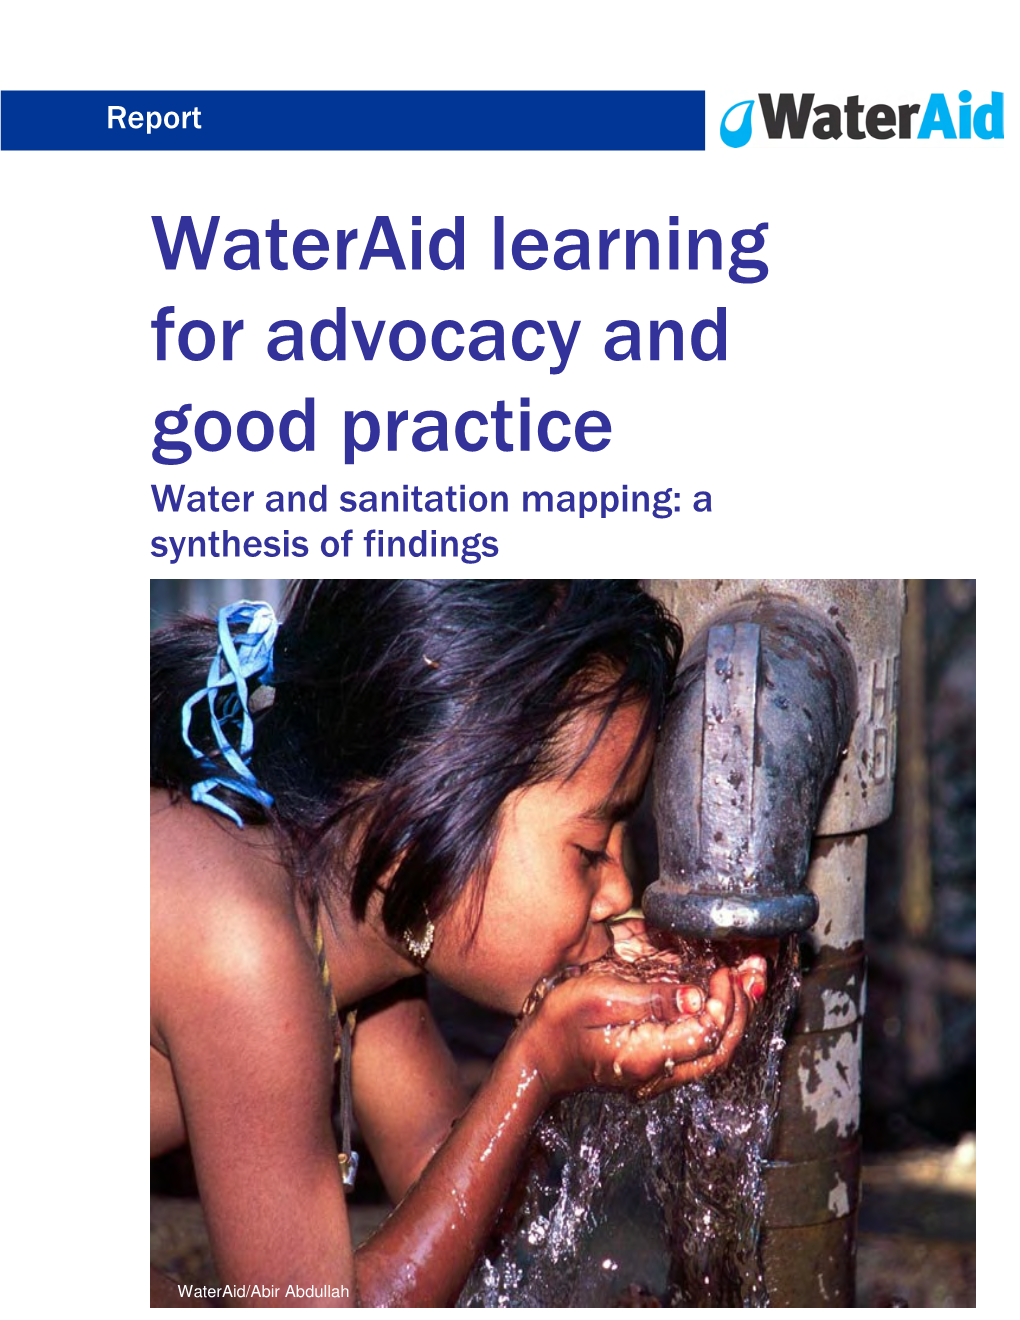 Wateraid Learning for Advocacy and Good Practice Water and Sanitation Mapping: a Synthesis of Findings